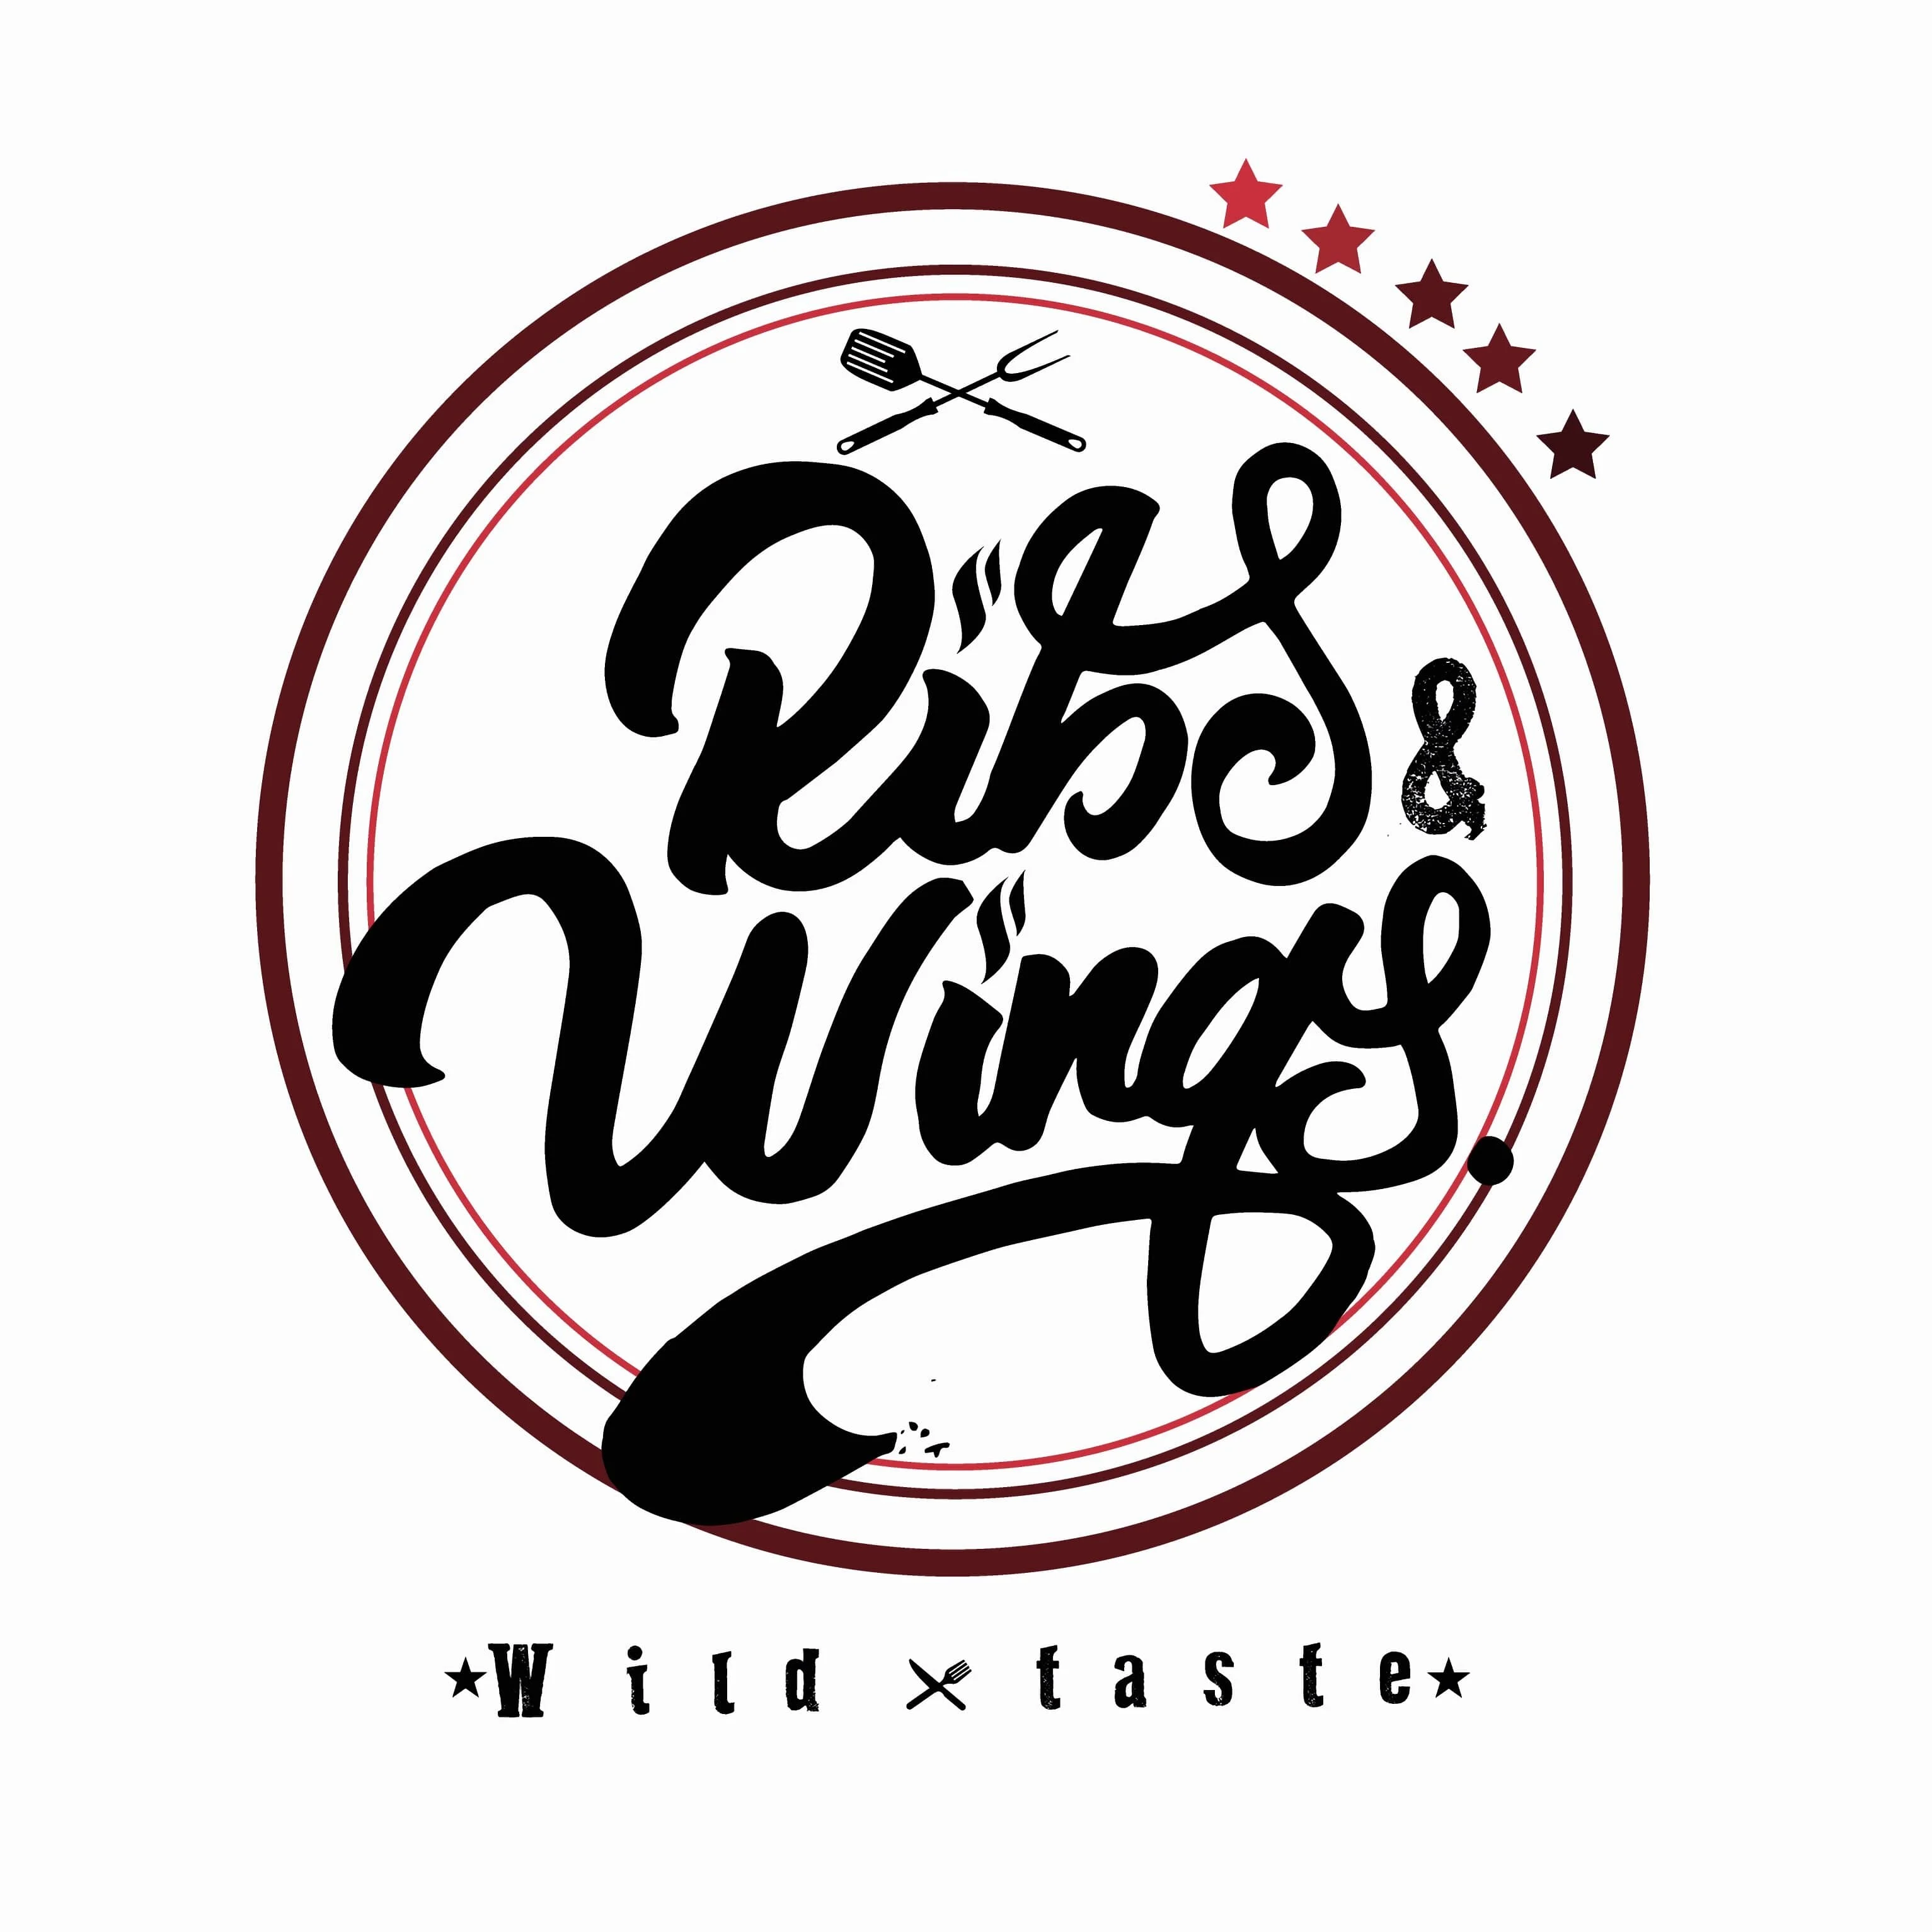 Restaurante-ribs-and-wings-22601